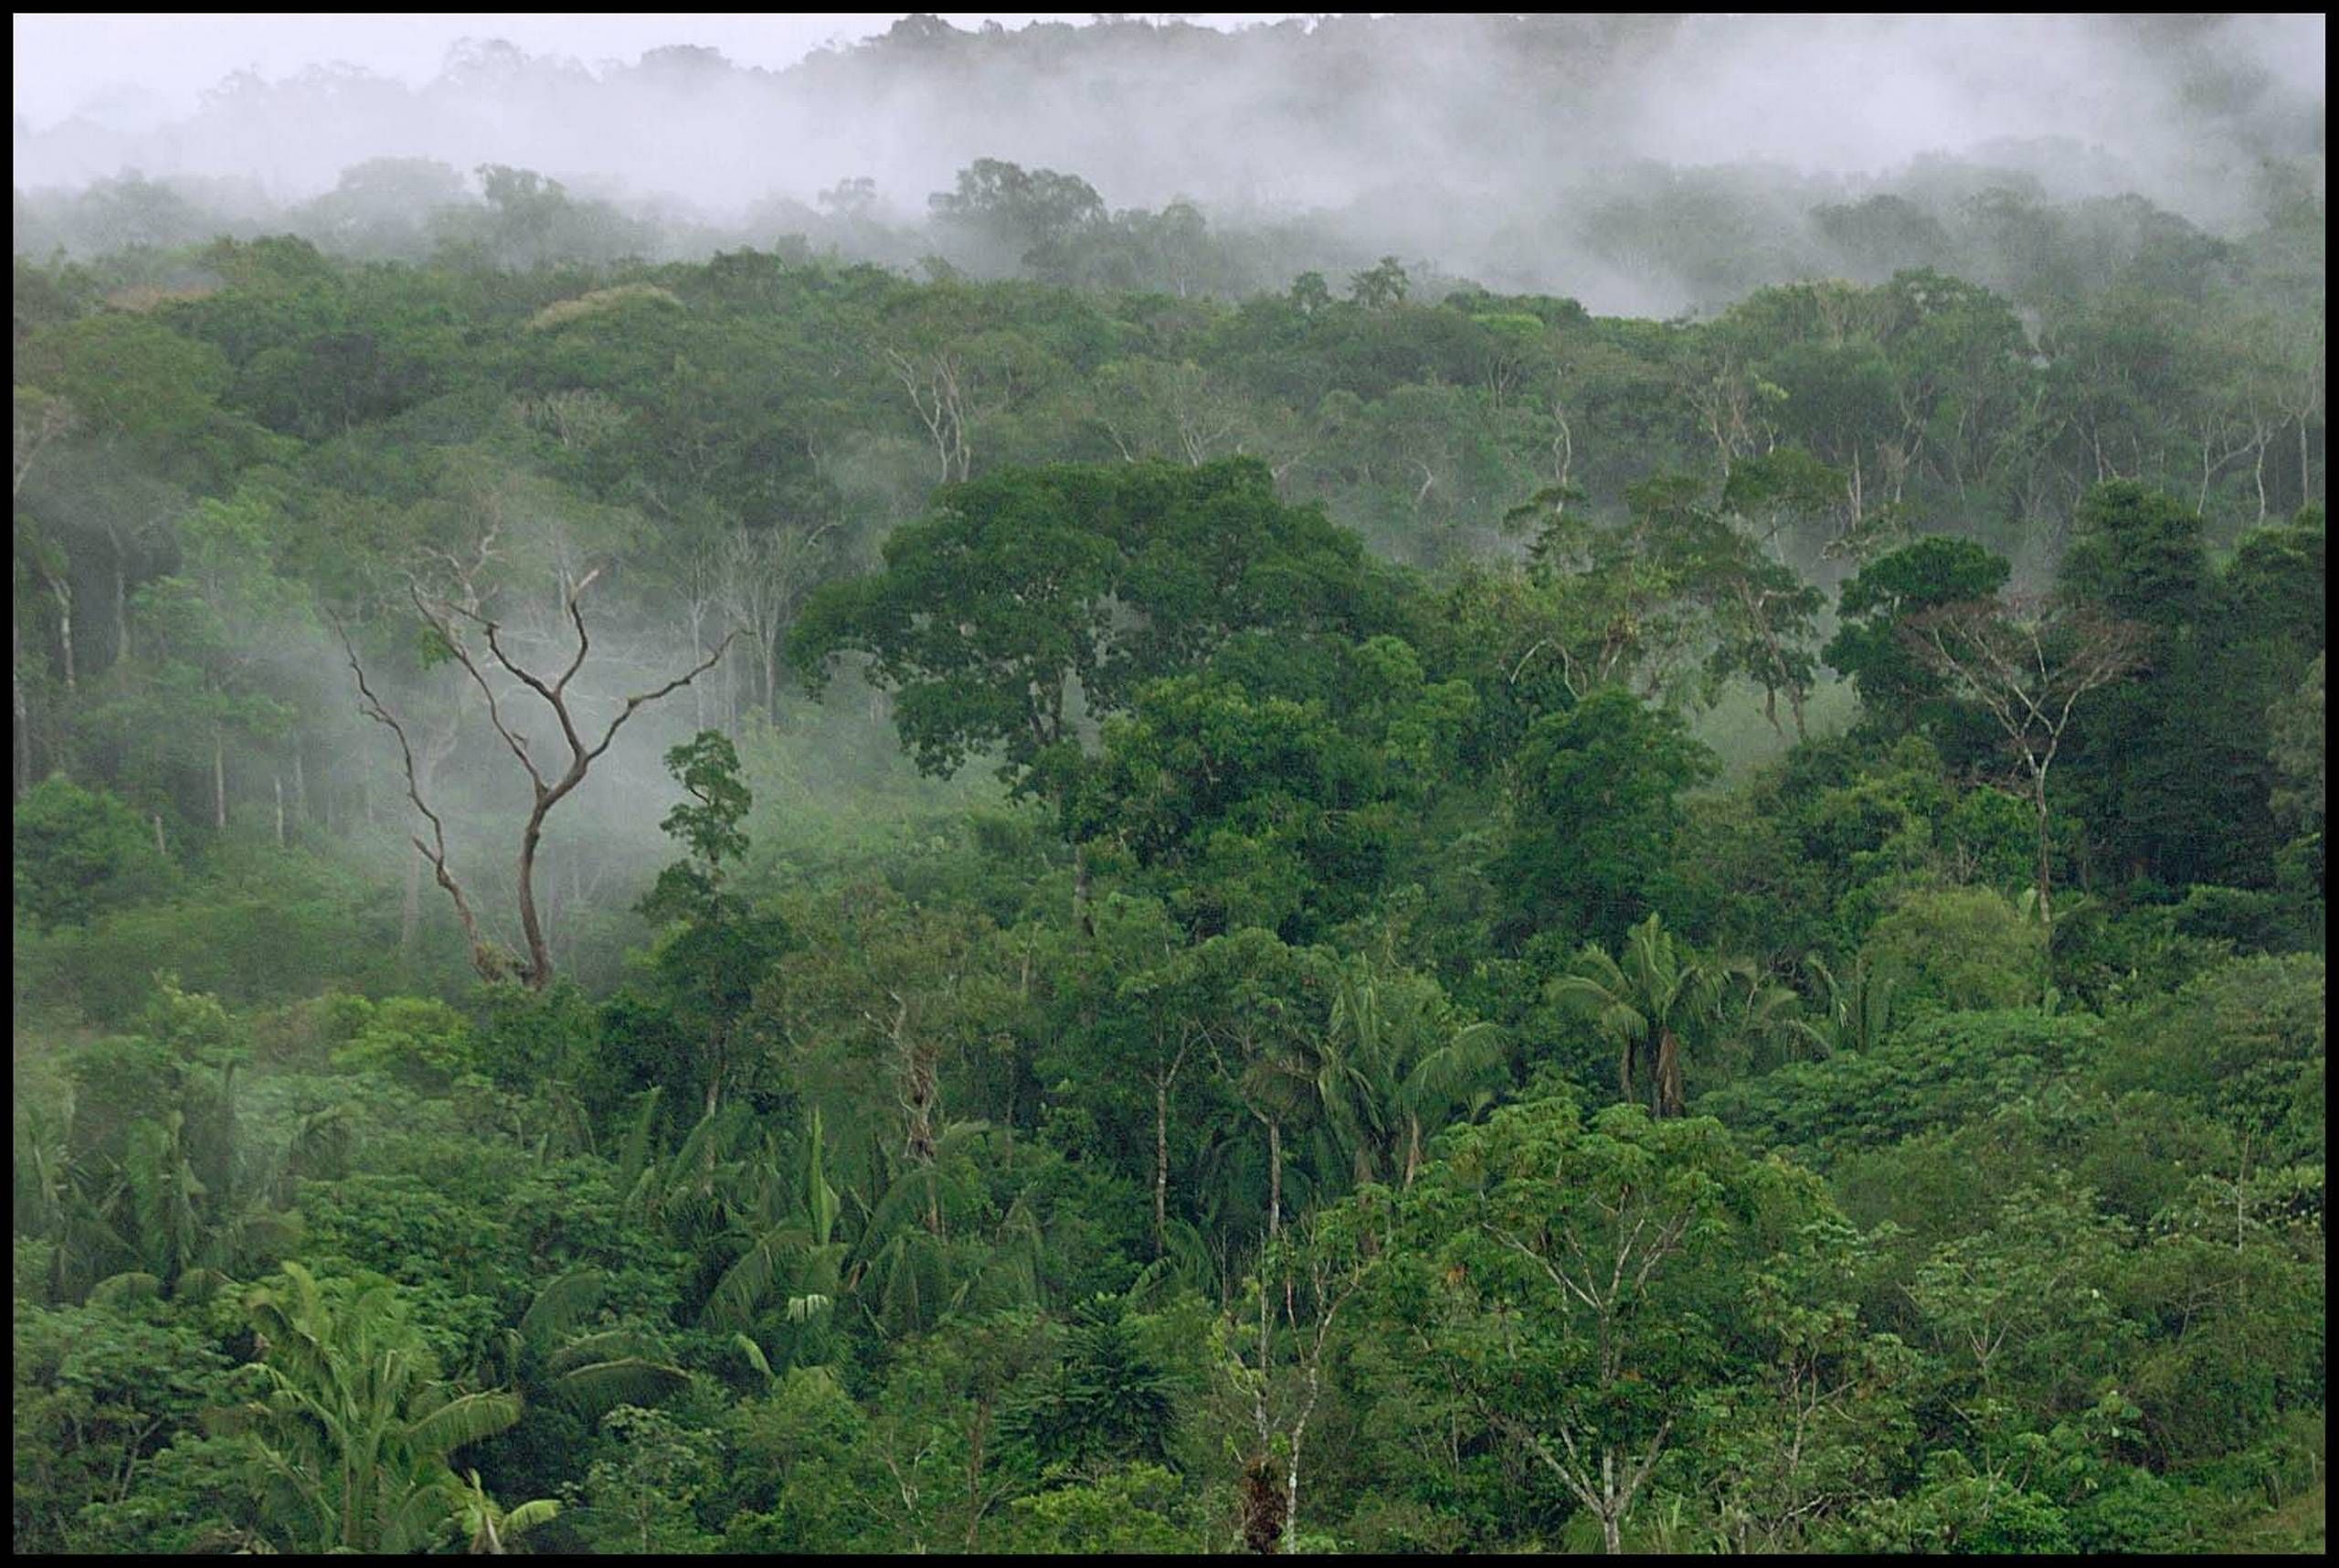 How Americans' love of is helping destroy the Amazon rainforest